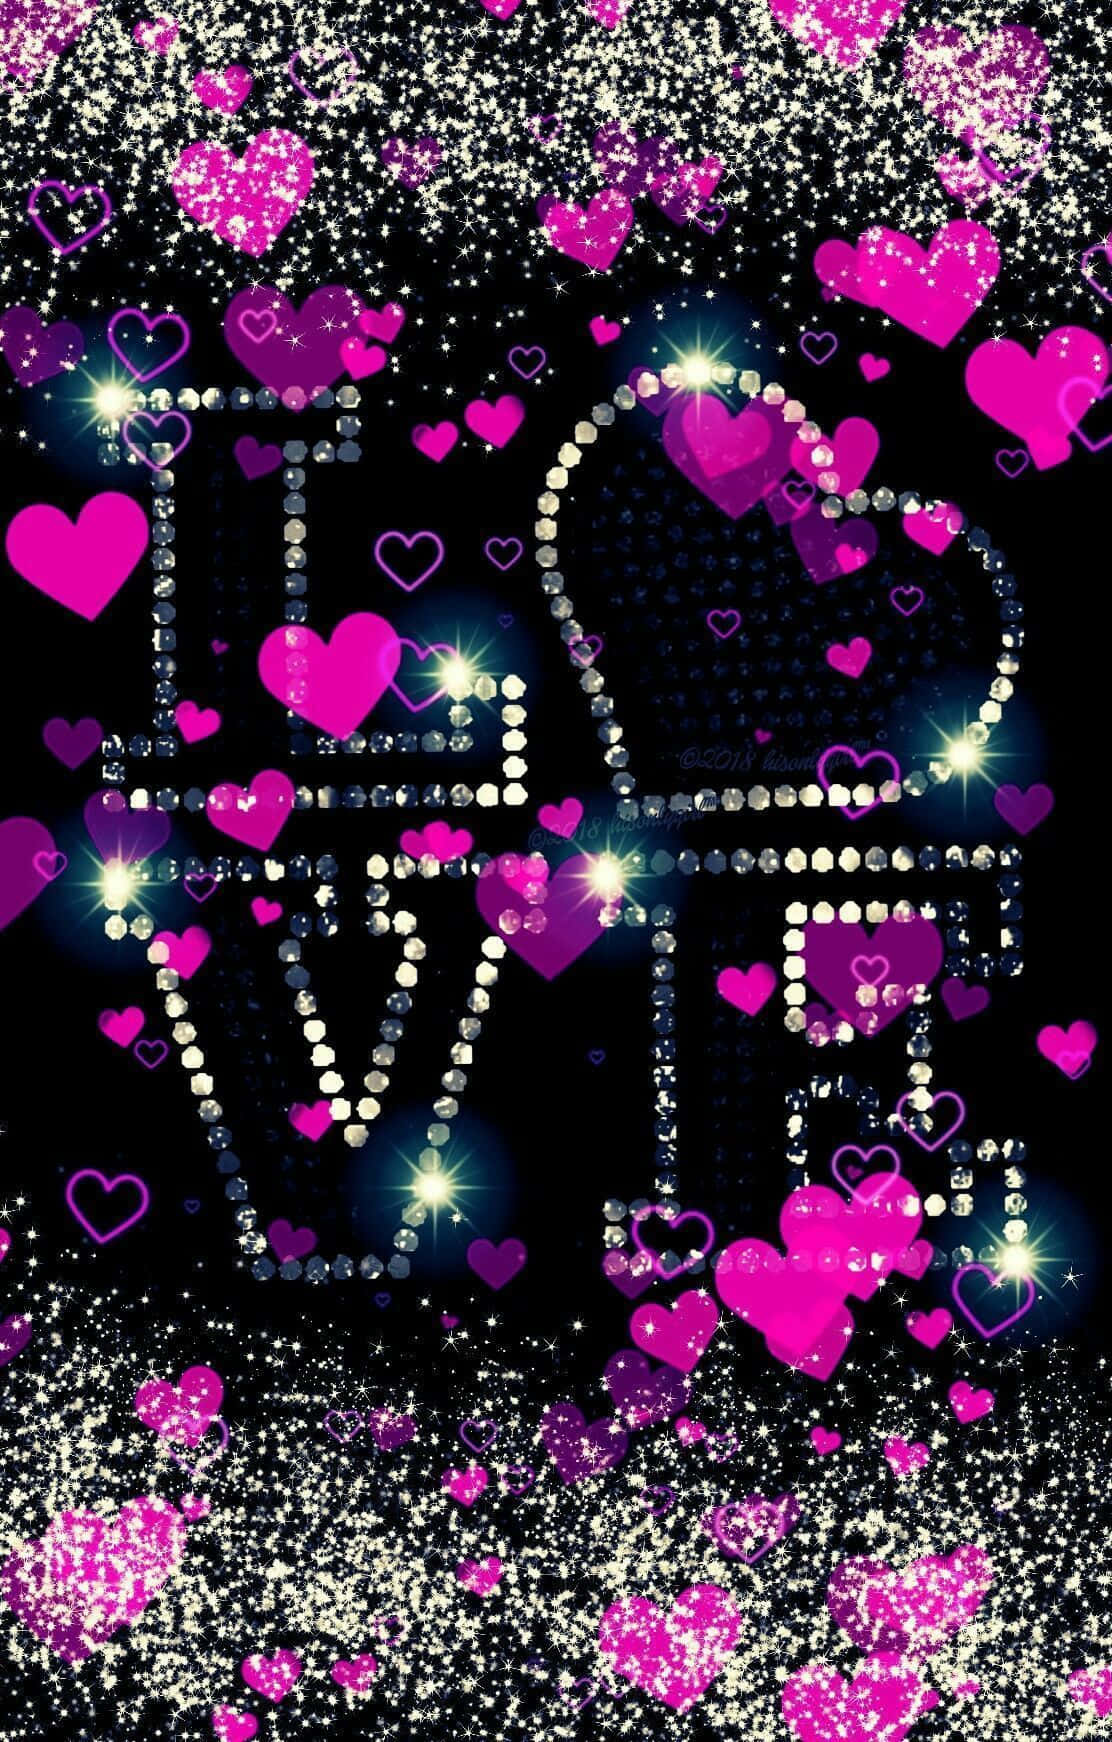 "Spread the Love with Glitter Pink Hearts" Wallpaper